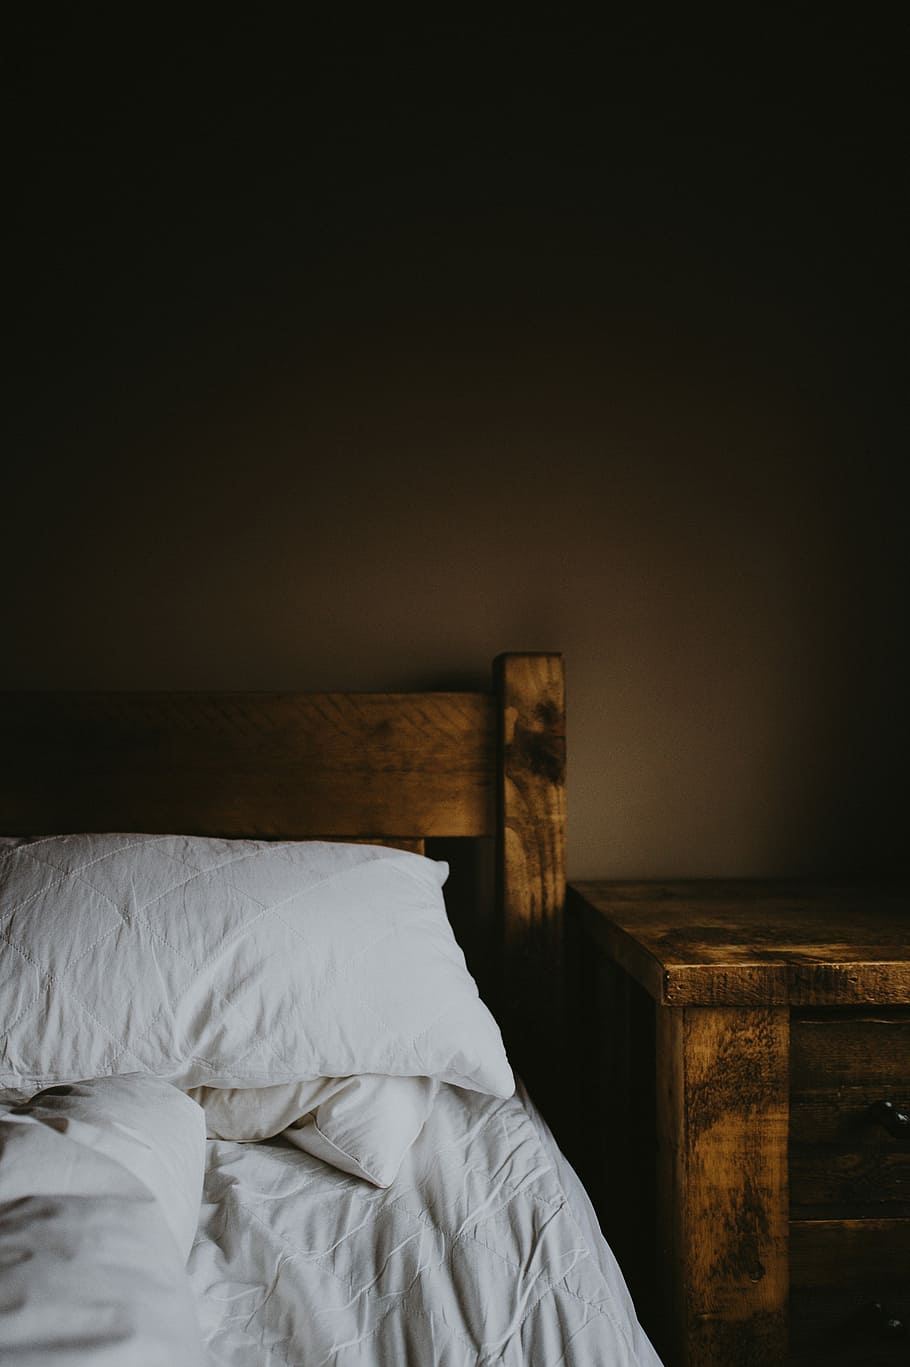 Bedtime, brown wooden nightstand beside bed with white sheet